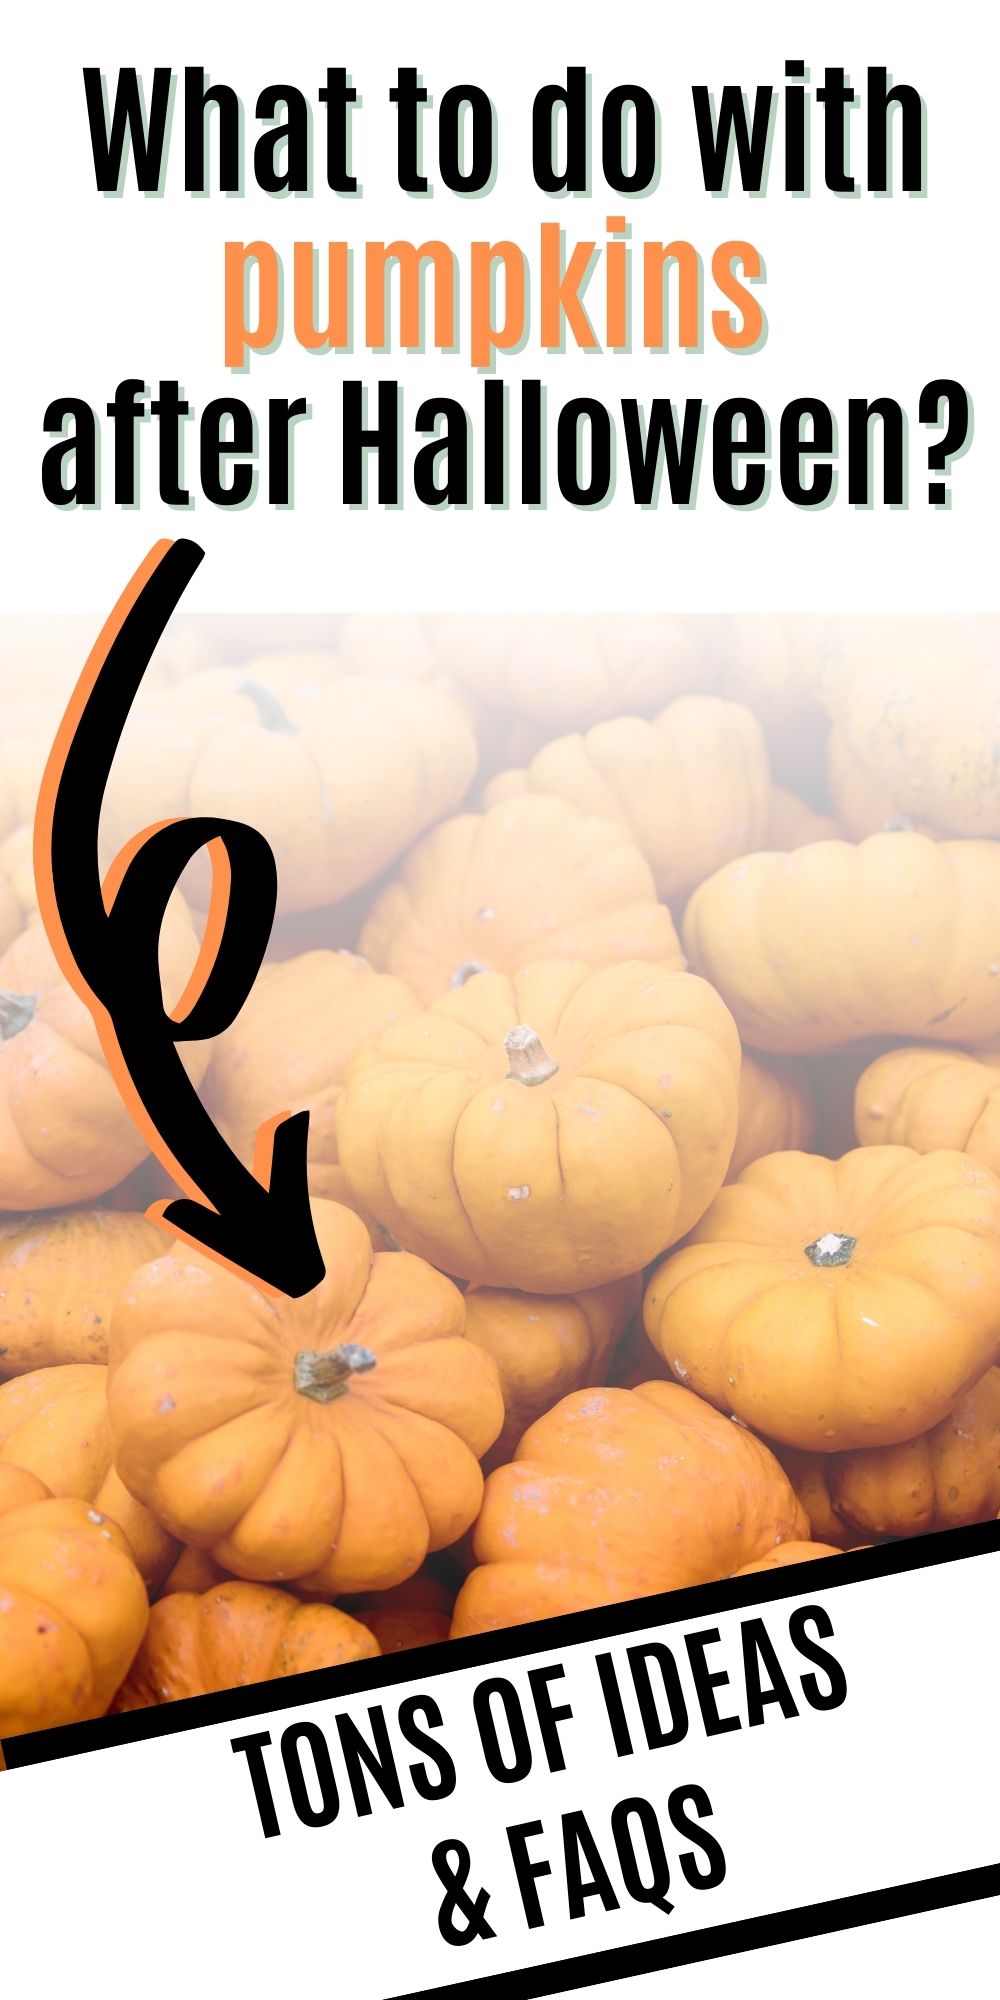 What to do with pumpkins after halloween